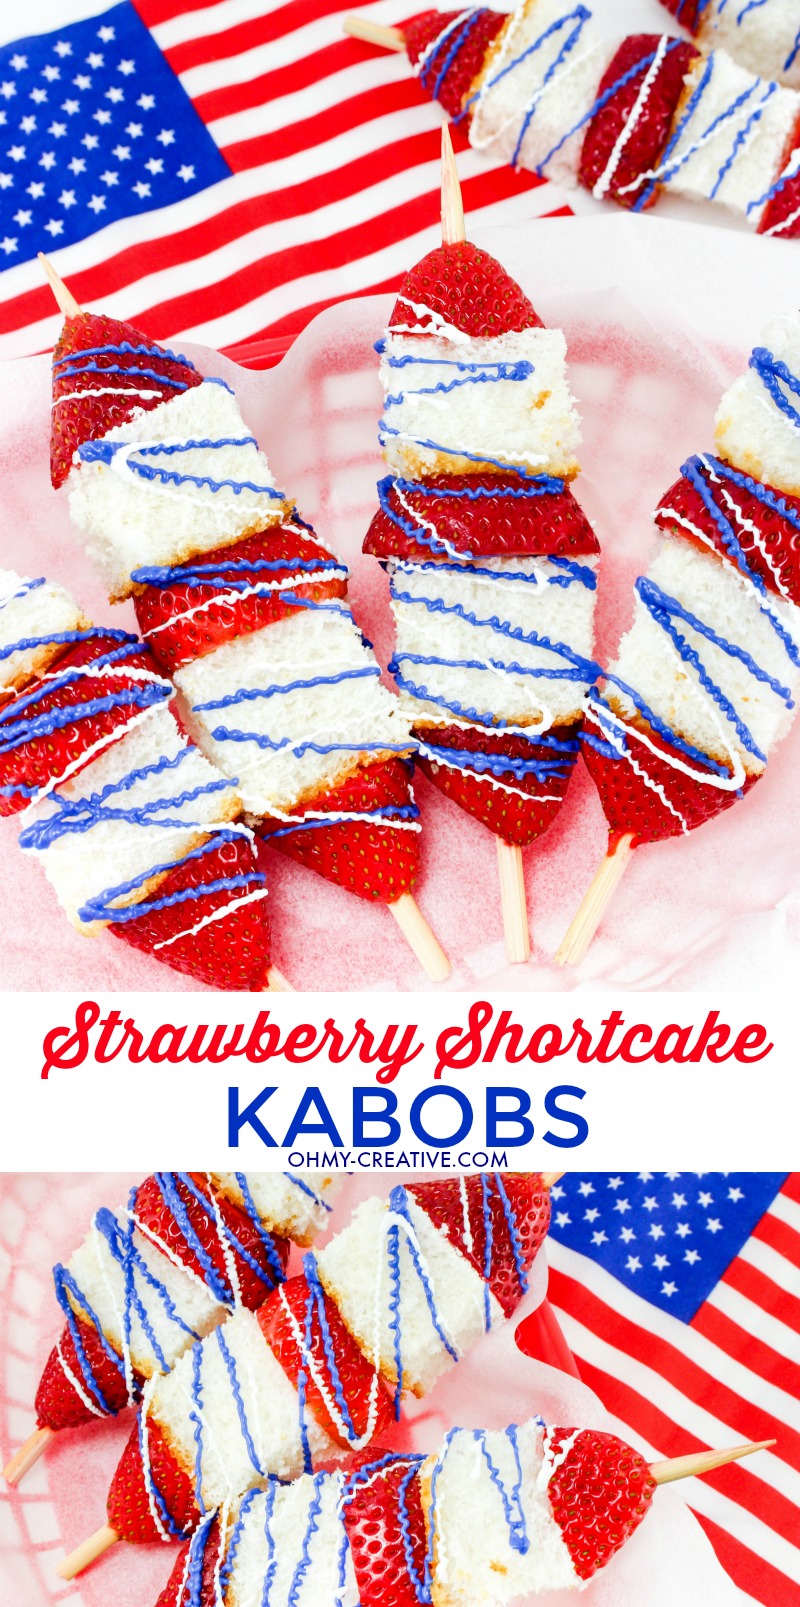 These Strawberry Shortcake Dessert Kabobs are delicious all summer long! | OHMY-CREATIVE.COM | strawberry shortcake recipe | strawberry shortcake skewers | fruit kabobs | fruit skewers | red white and blue | patriotic dessert | how to make kabobs | summer dessert | 4th of july dessert | fourth of july dessert | angel food cake | strawberries | dessert 